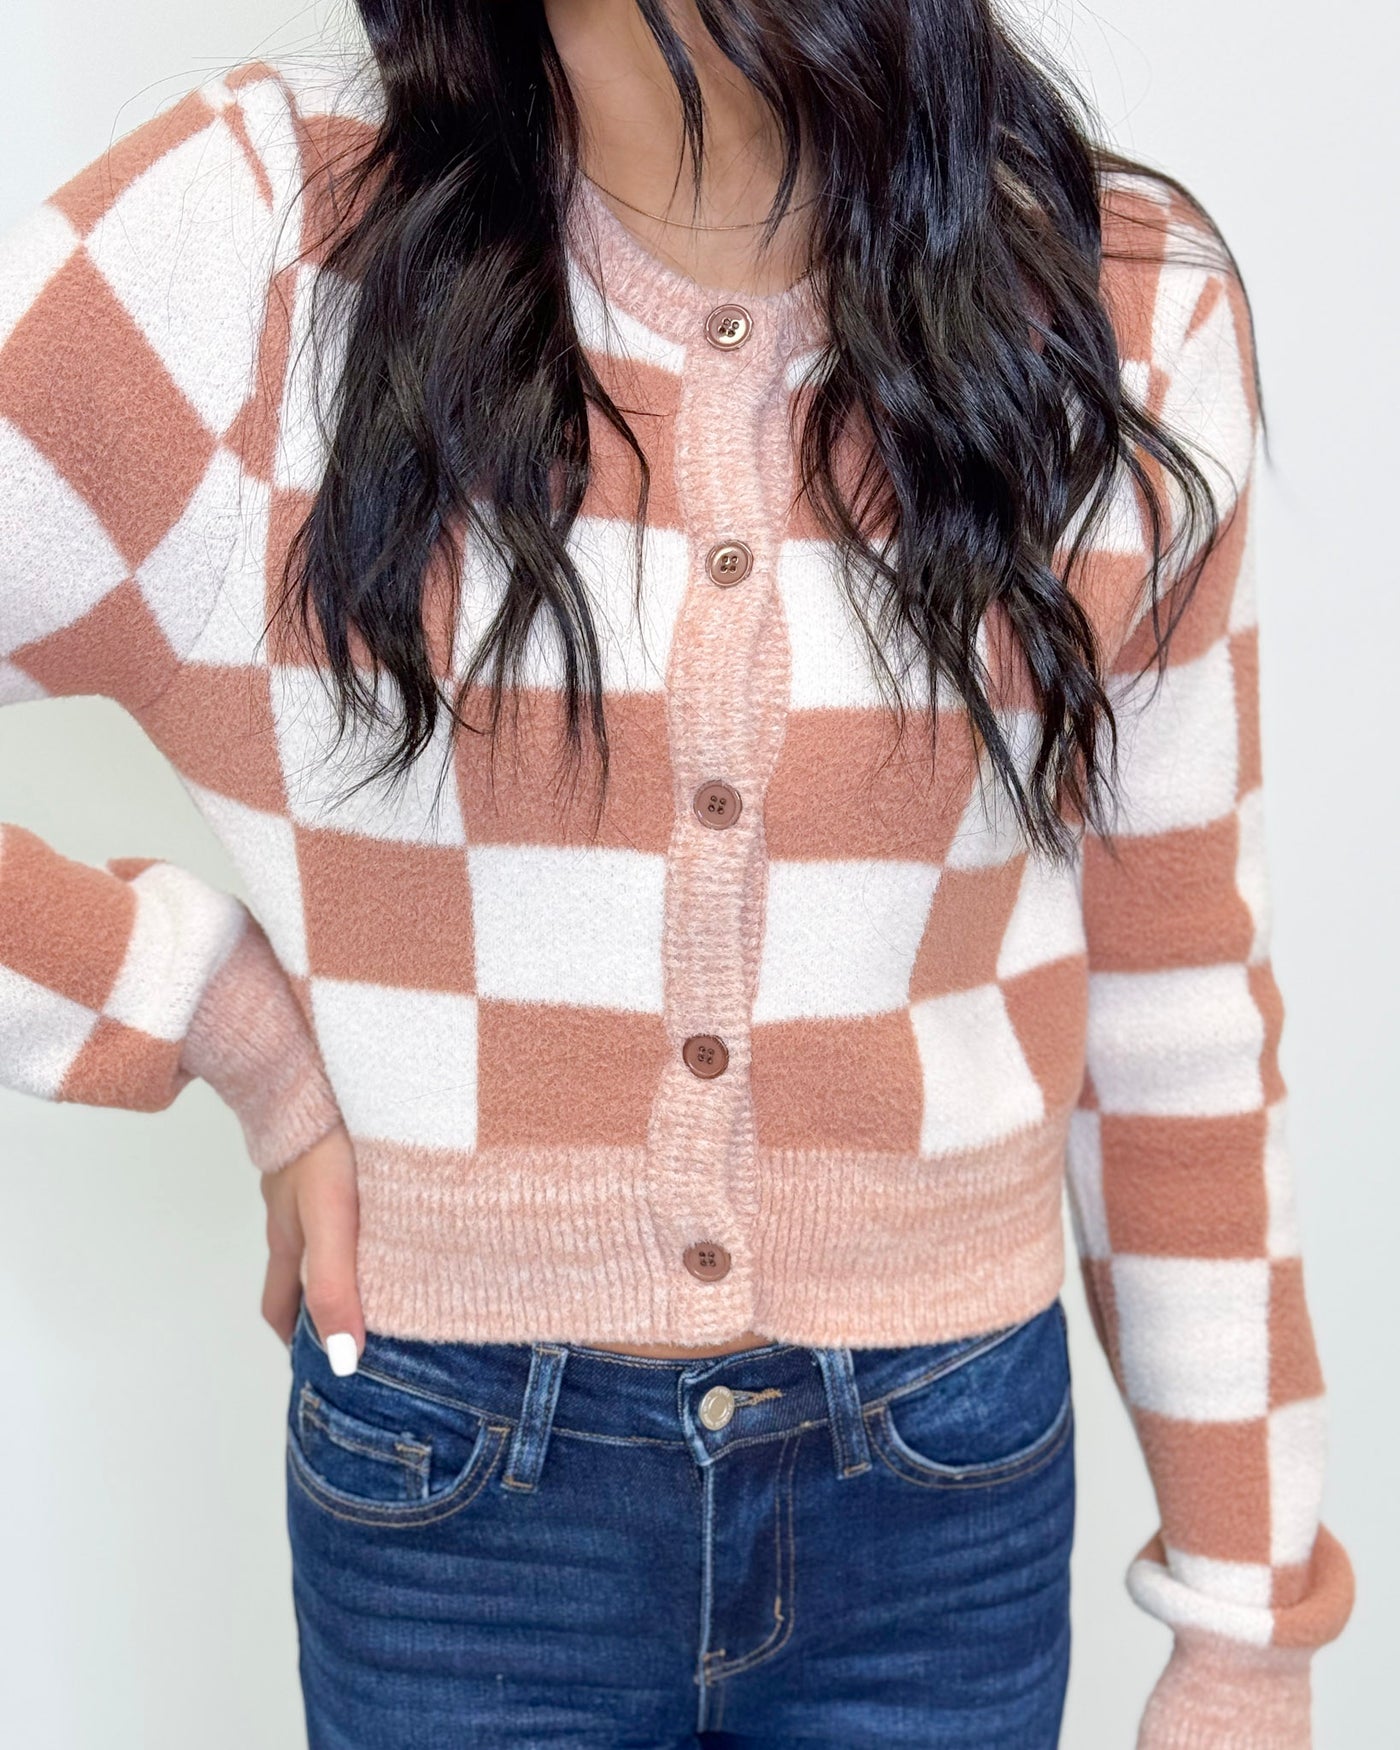 Candy Apple Sweater